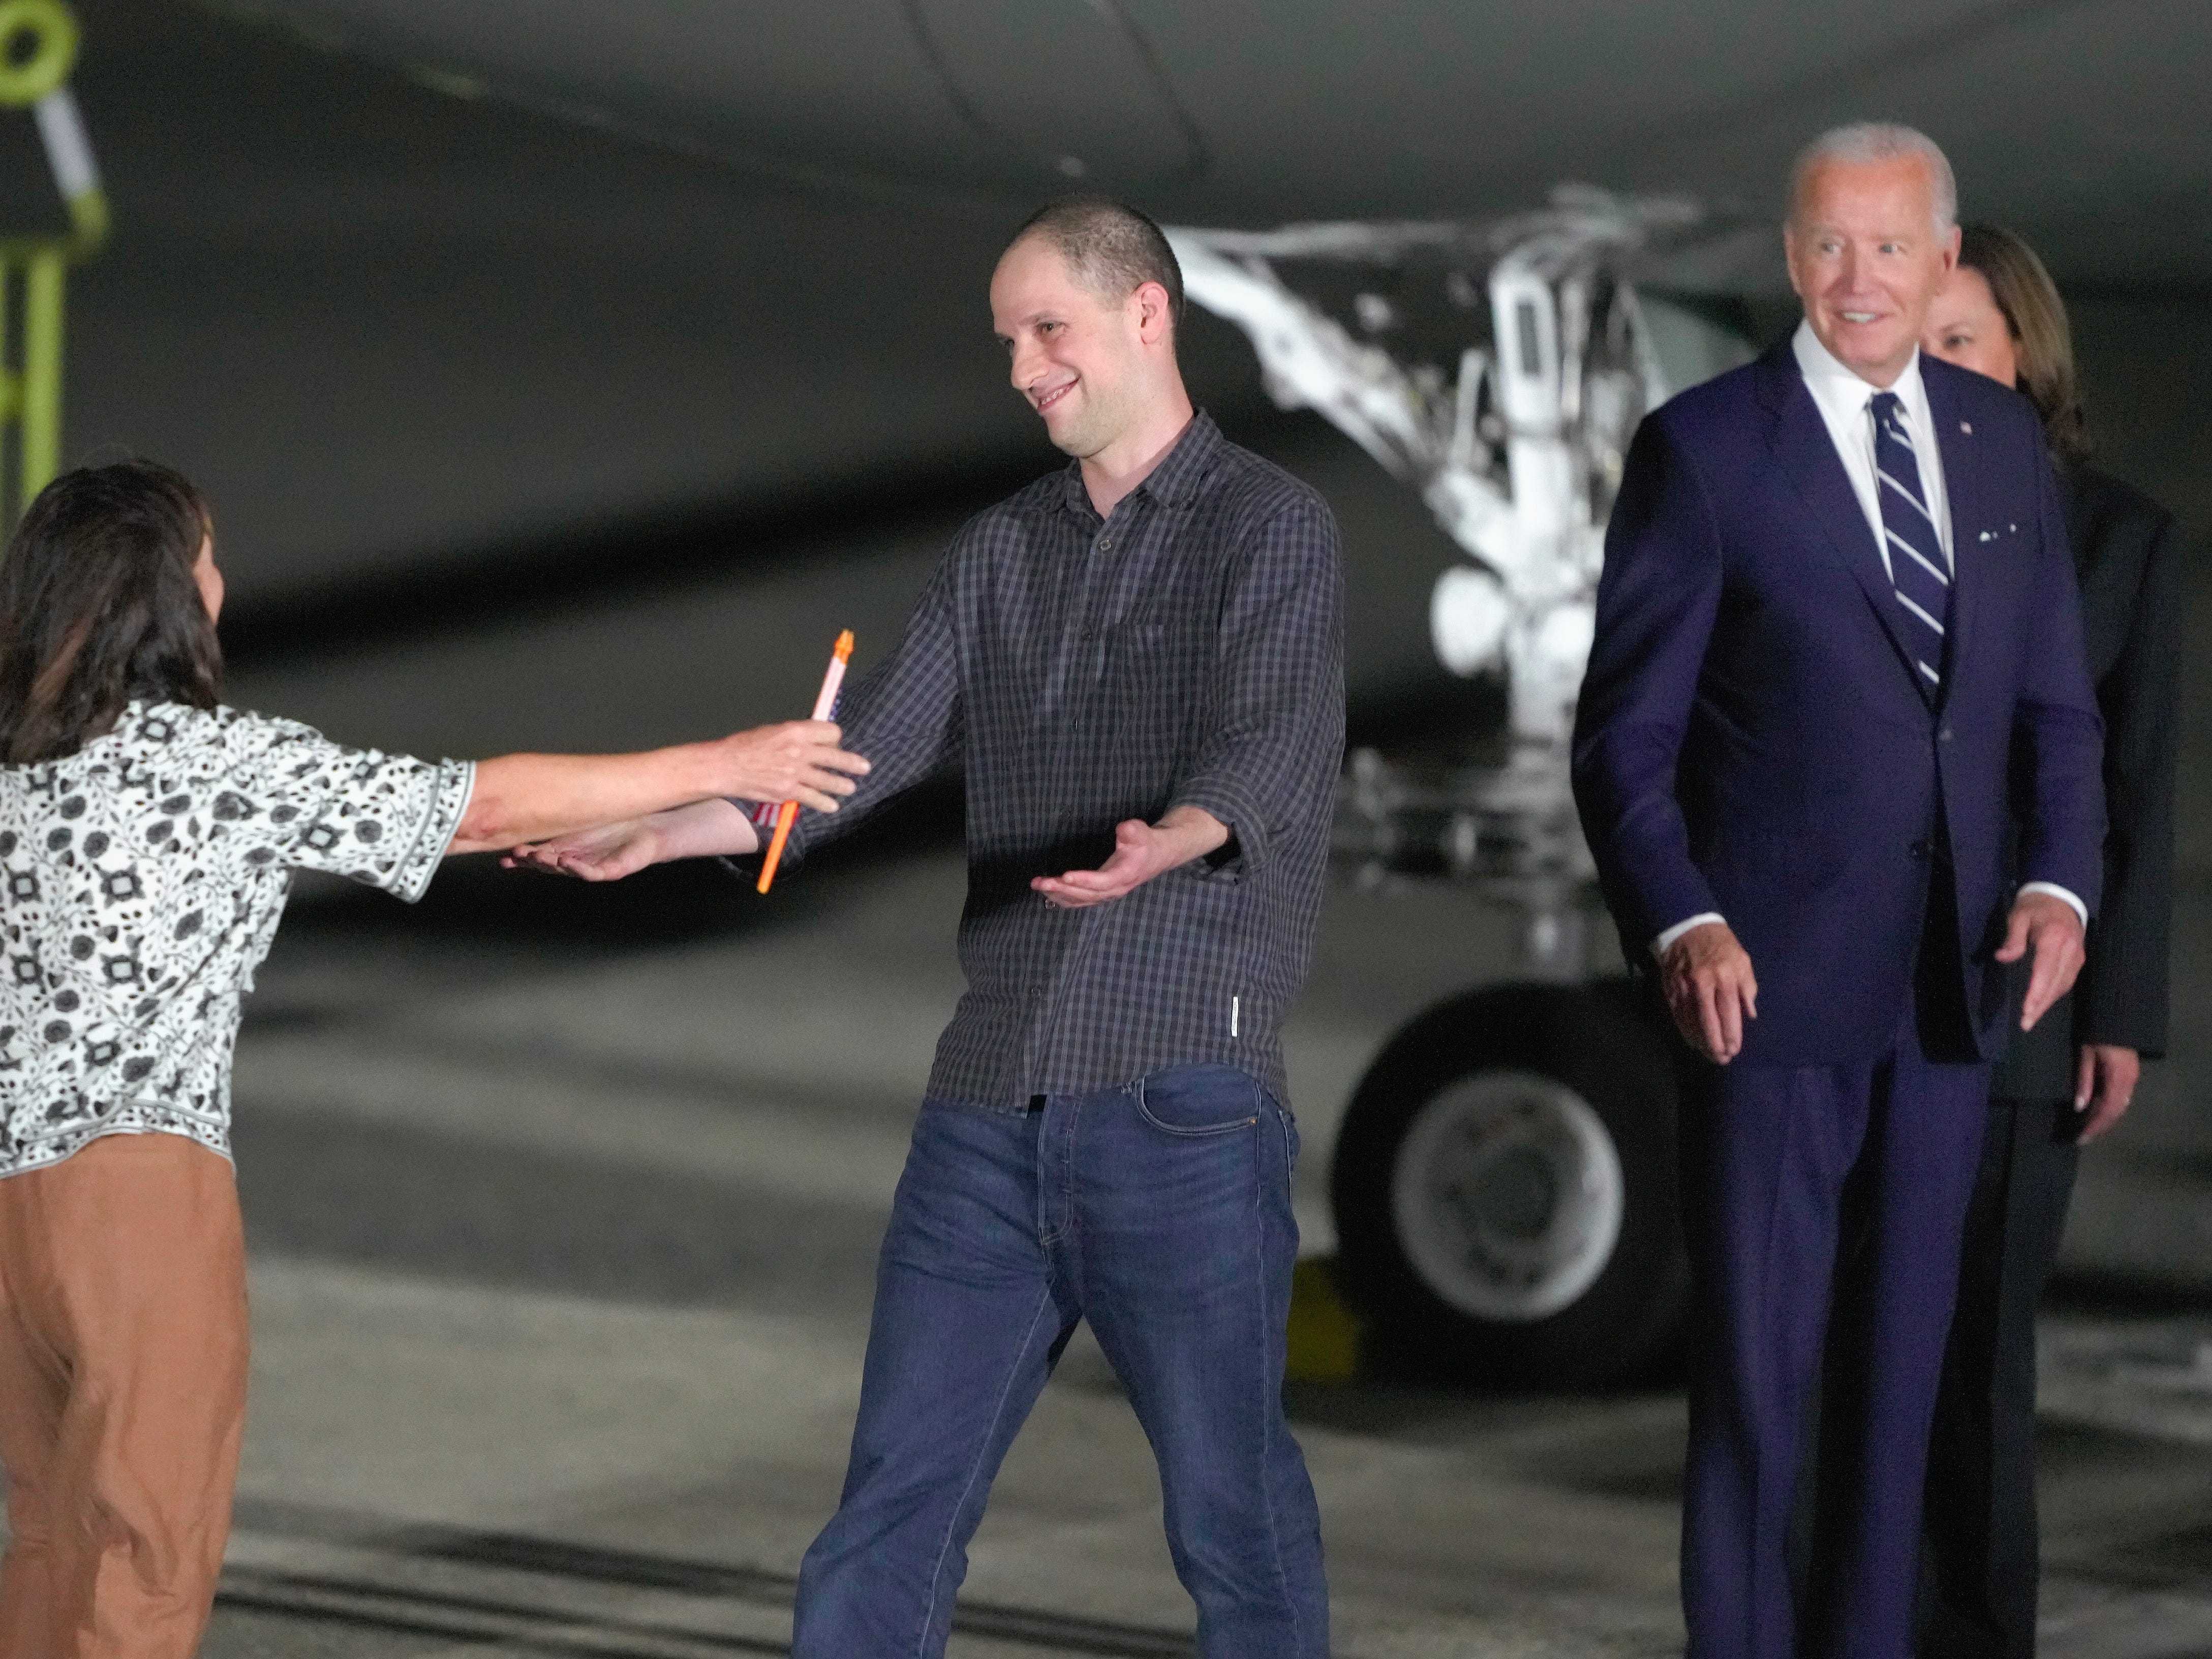 Biden and Harris greet freed prisoners on US soil after Russian exchange